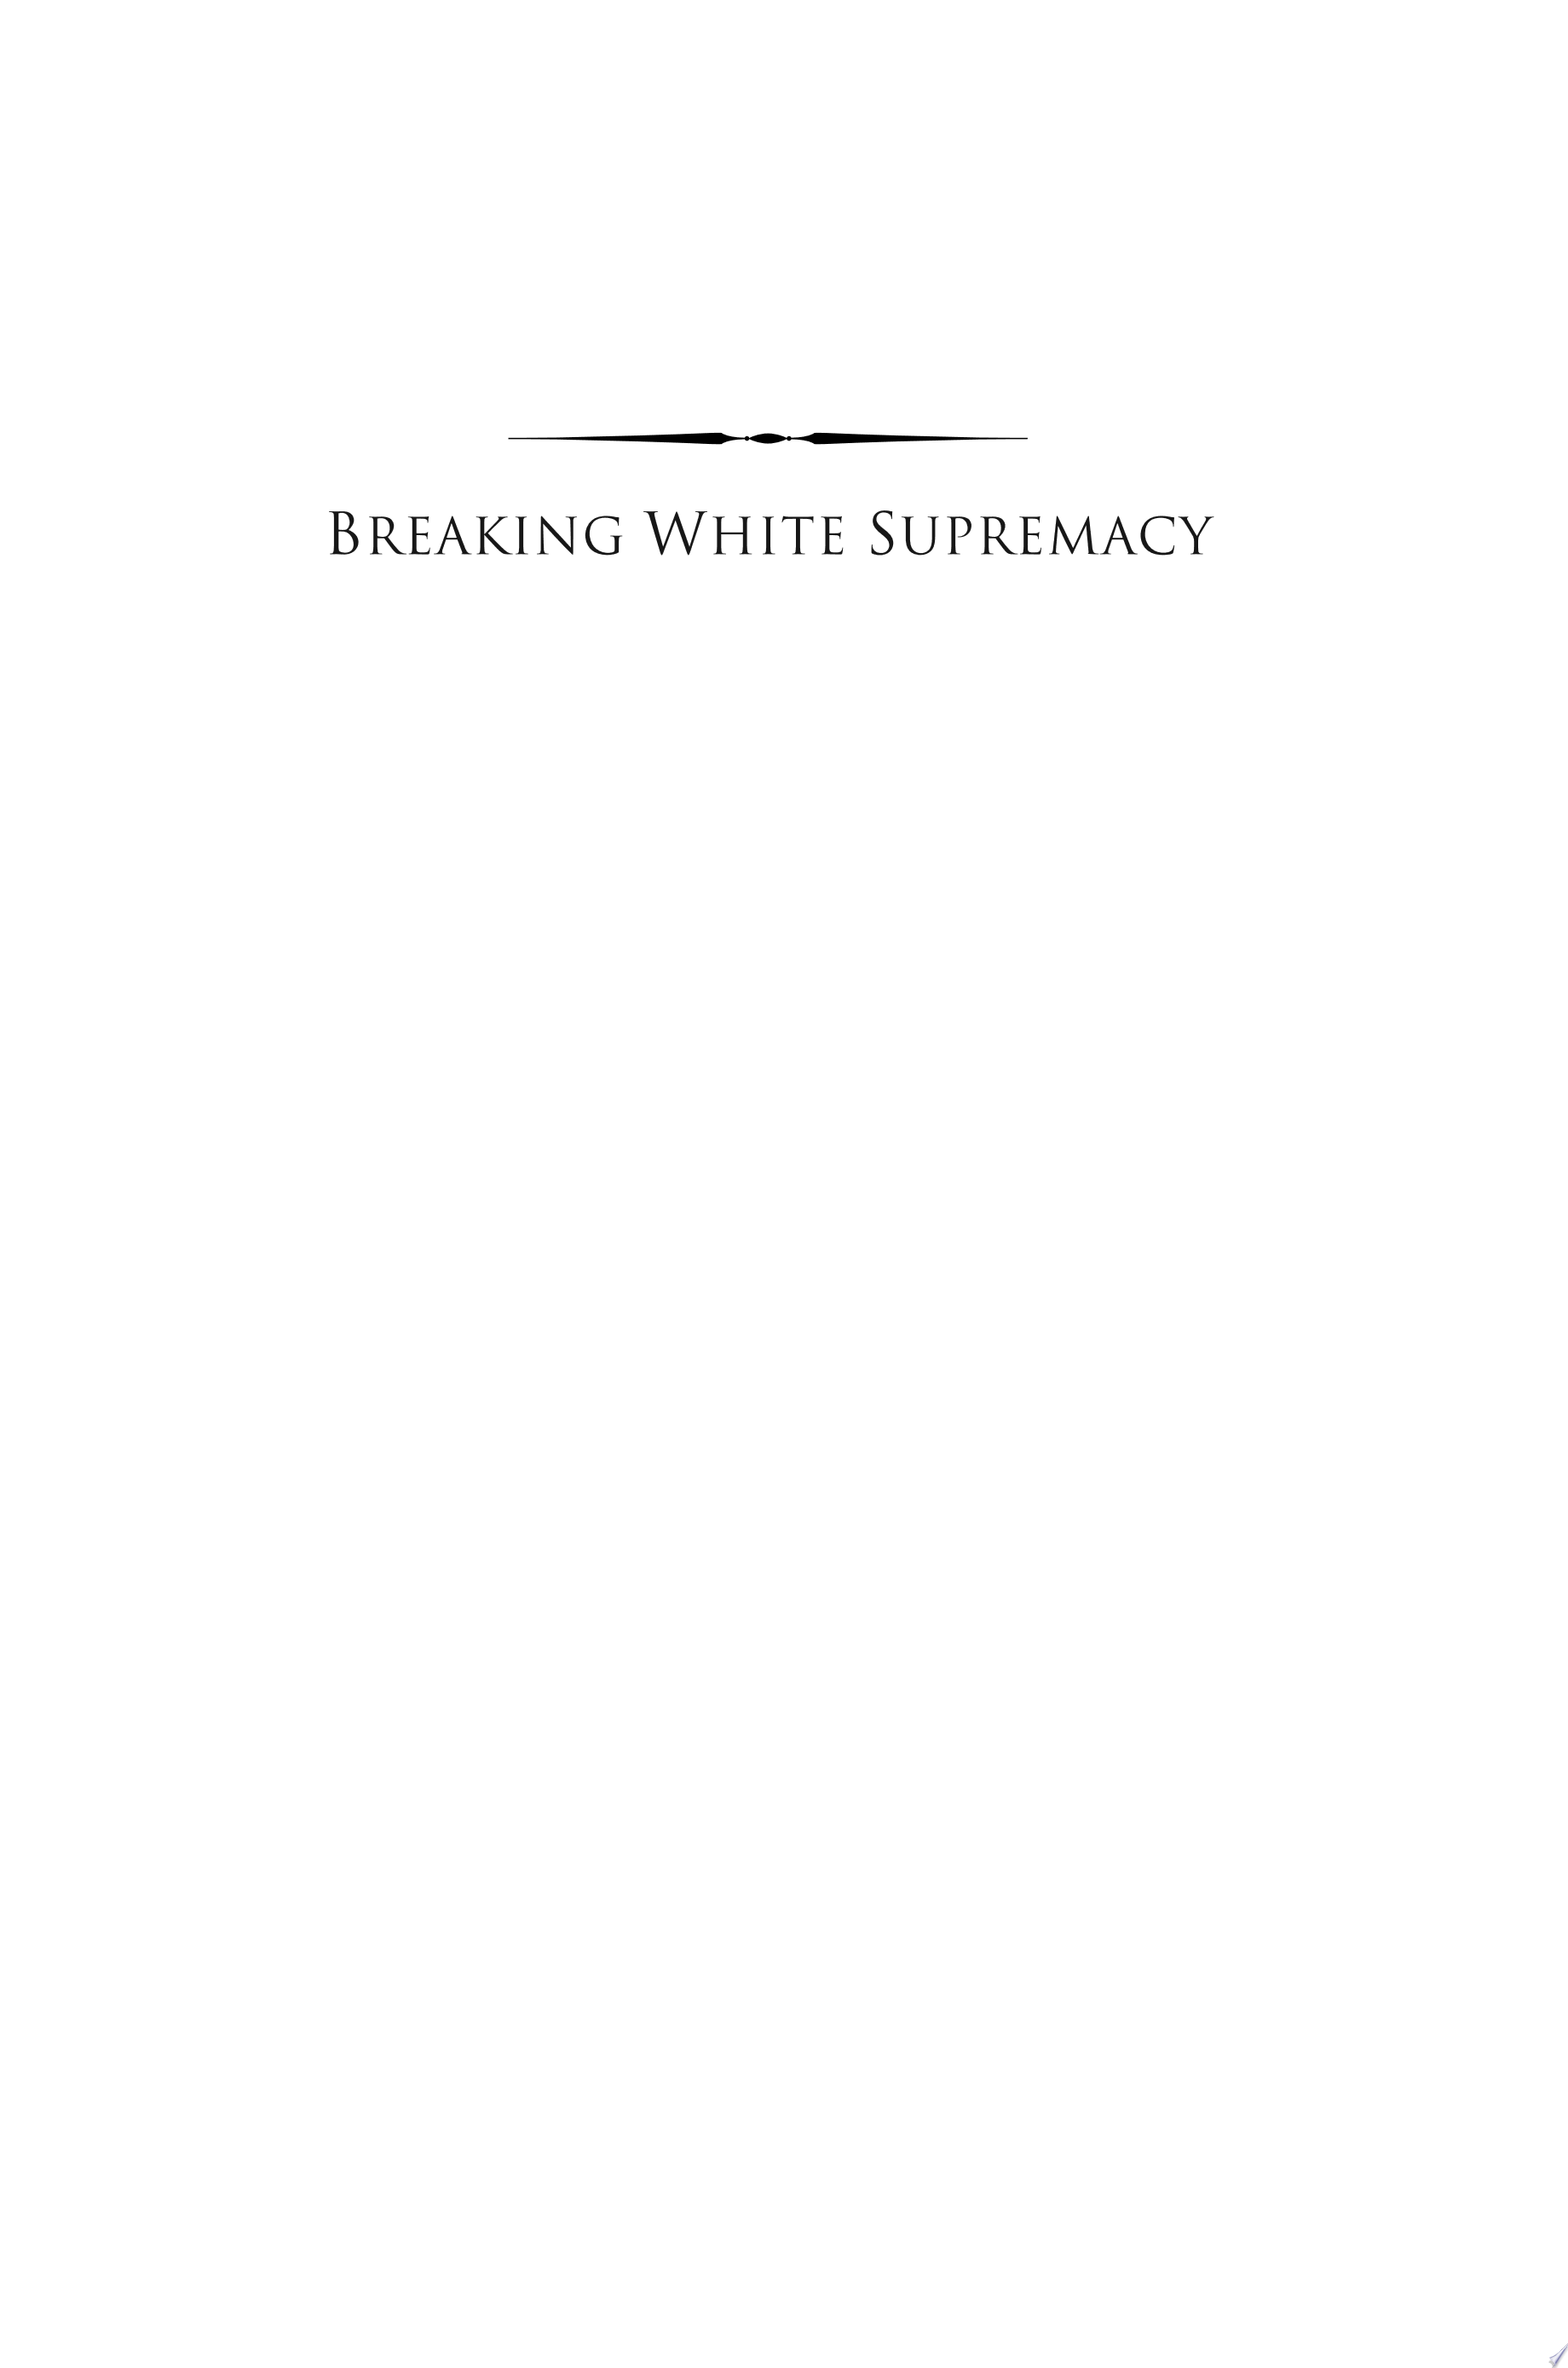 Image for "Breaking White Supremacy"